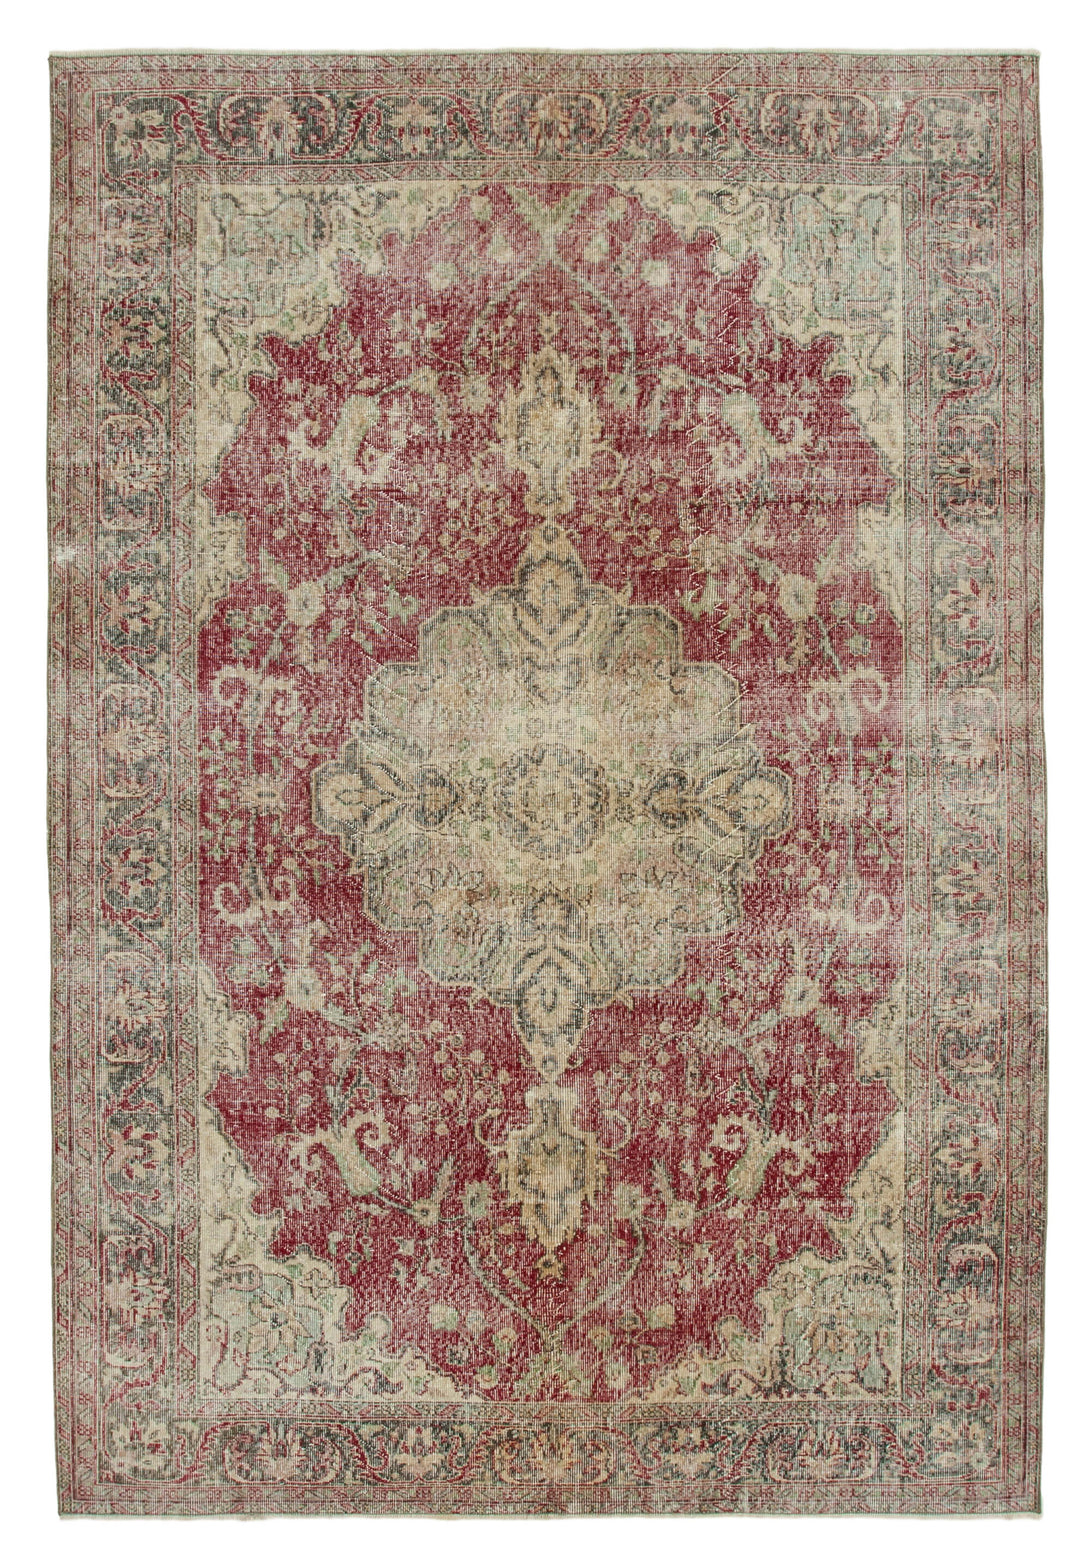 Handmade White Wash Area Rug > Design# OL-AC-36423 > Size: 6'-10" x 10'-0", Carpet Culture Rugs, Handmade Rugs, NYC Rugs, New Rugs, Shop Rugs, Rug Store, Outlet Rugs, SoHo Rugs, Rugs in USA